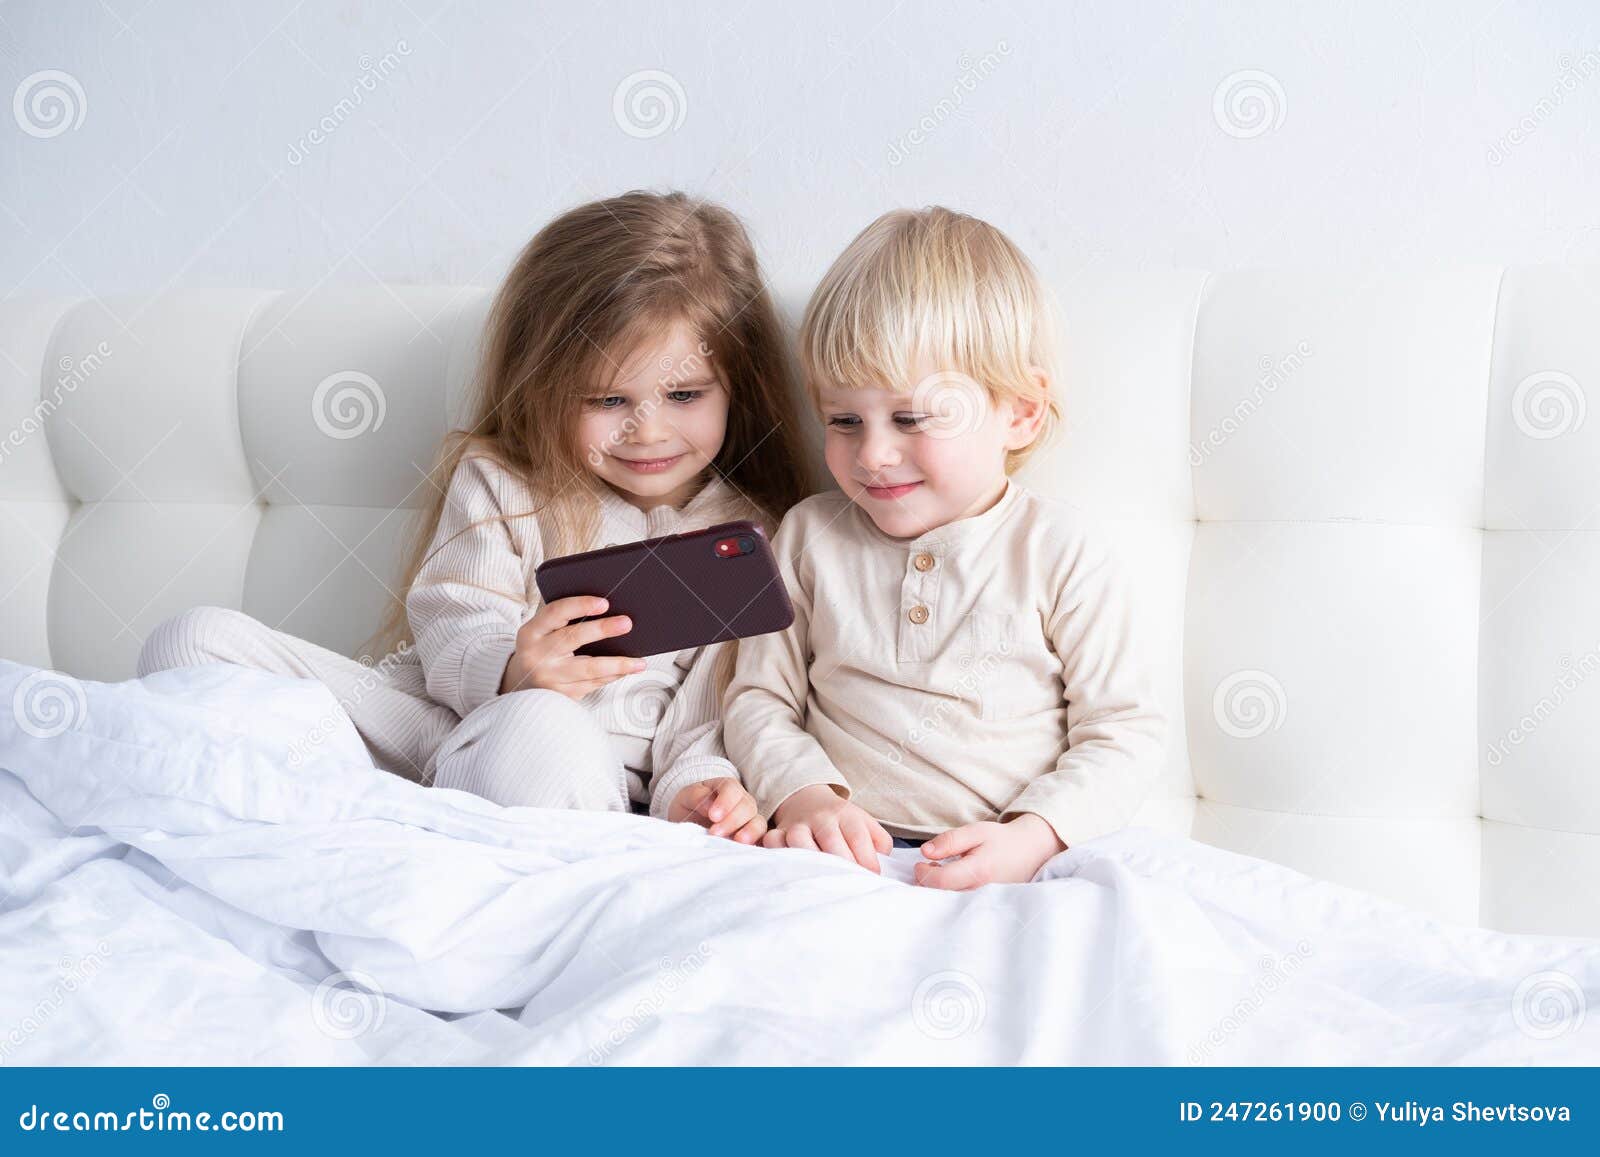 Two Cute Kids Girl and Boy Brother and Sister Using Phone Sitting on ...